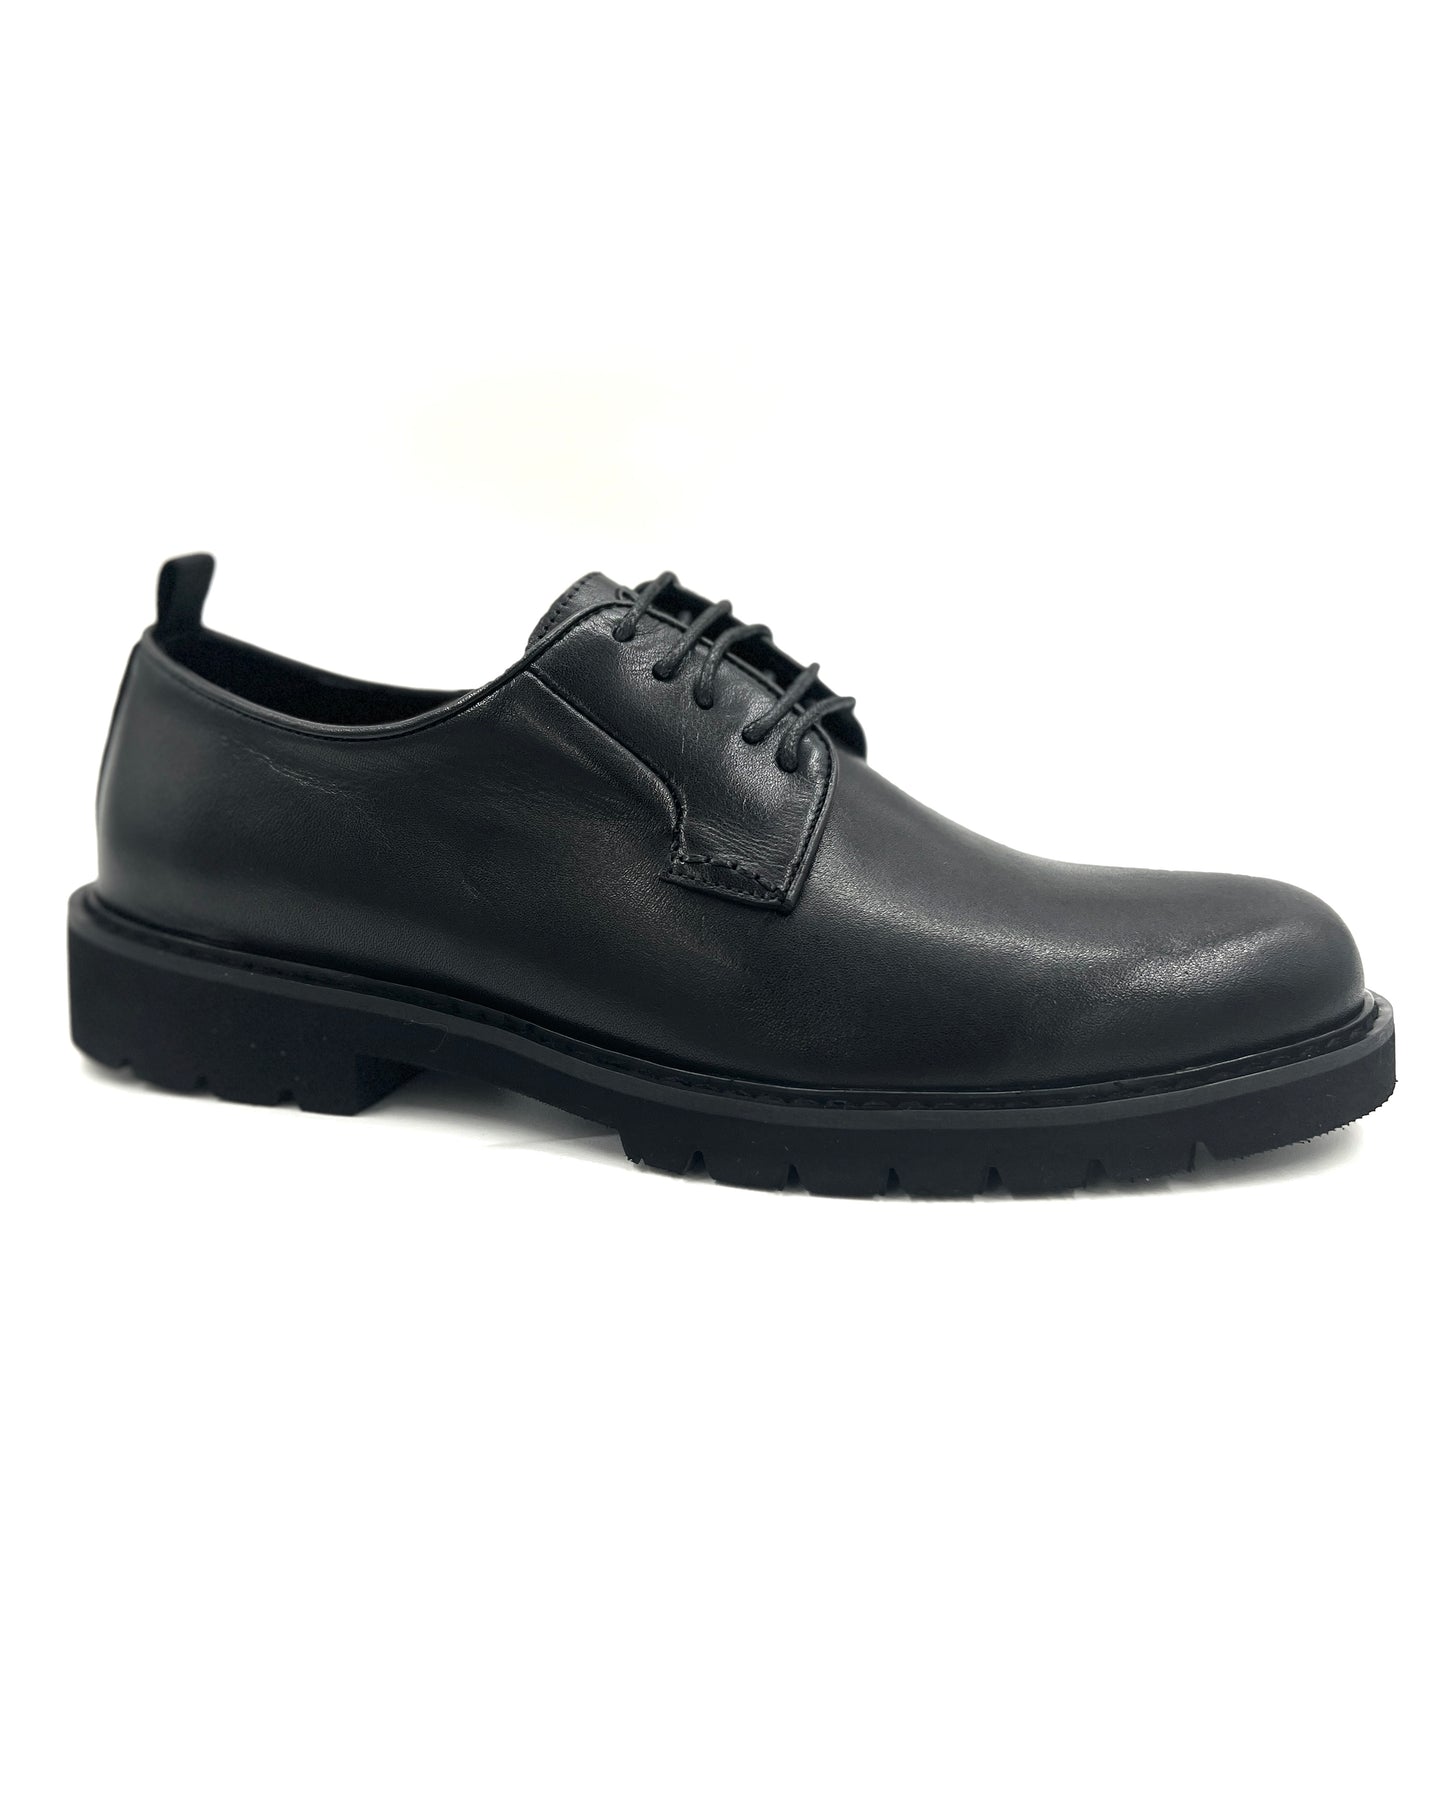 2H #005 Genuine Leather Black Classic Shoes